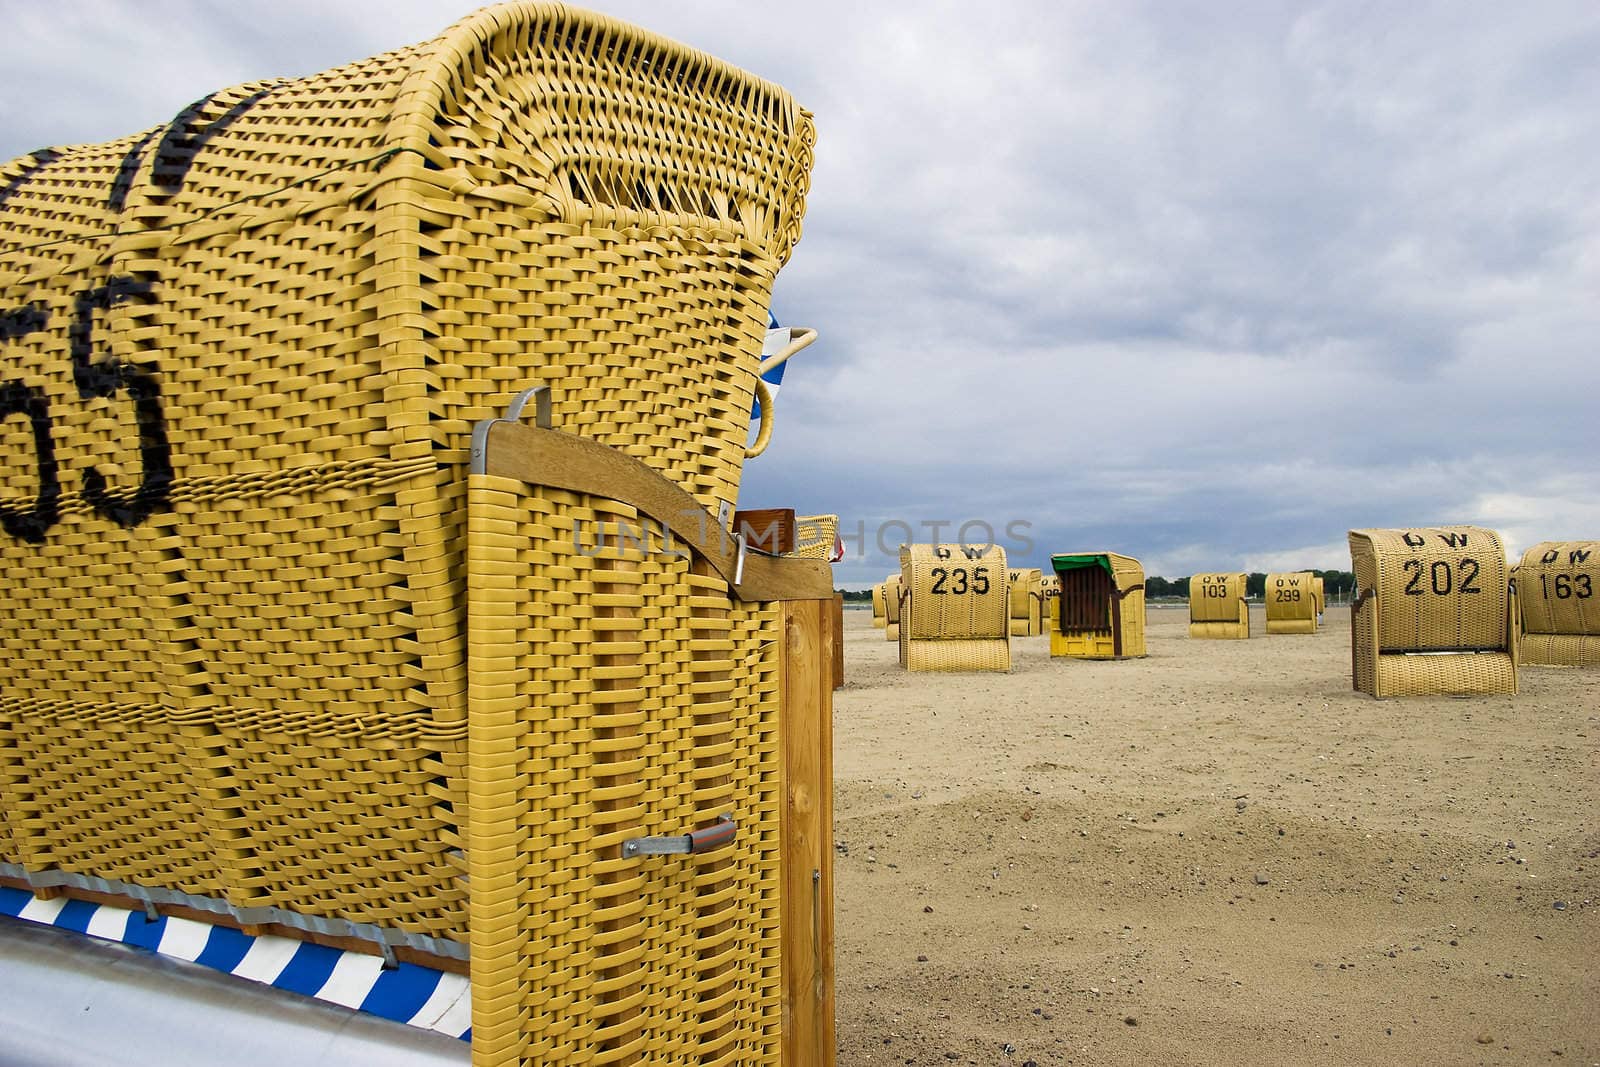 Beach wicker chairs with numbers on back in Germany near Baltic sea